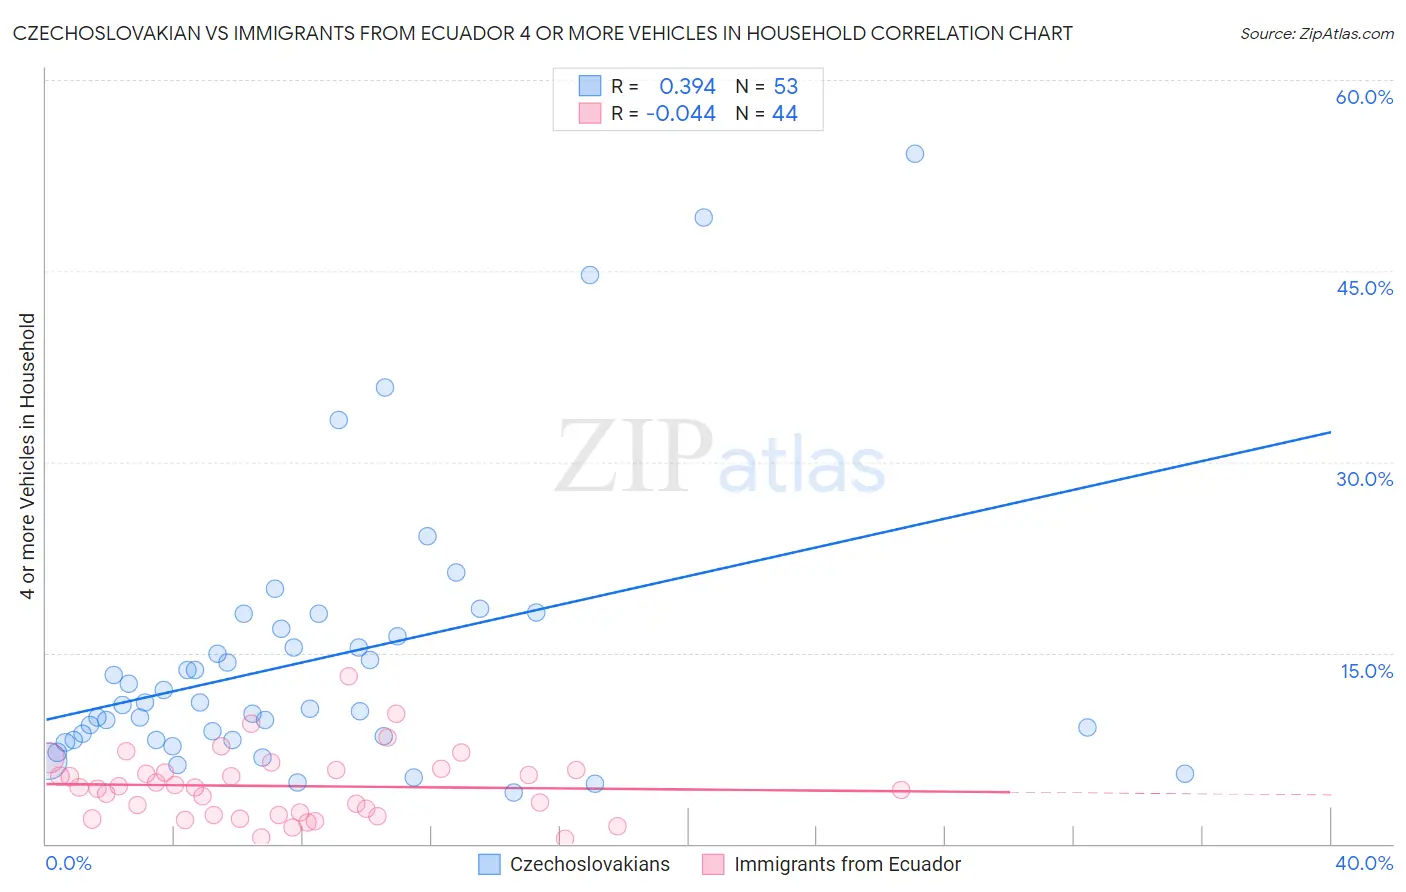 Czechoslovakian vs Immigrants from Ecuador 4 or more Vehicles in Household